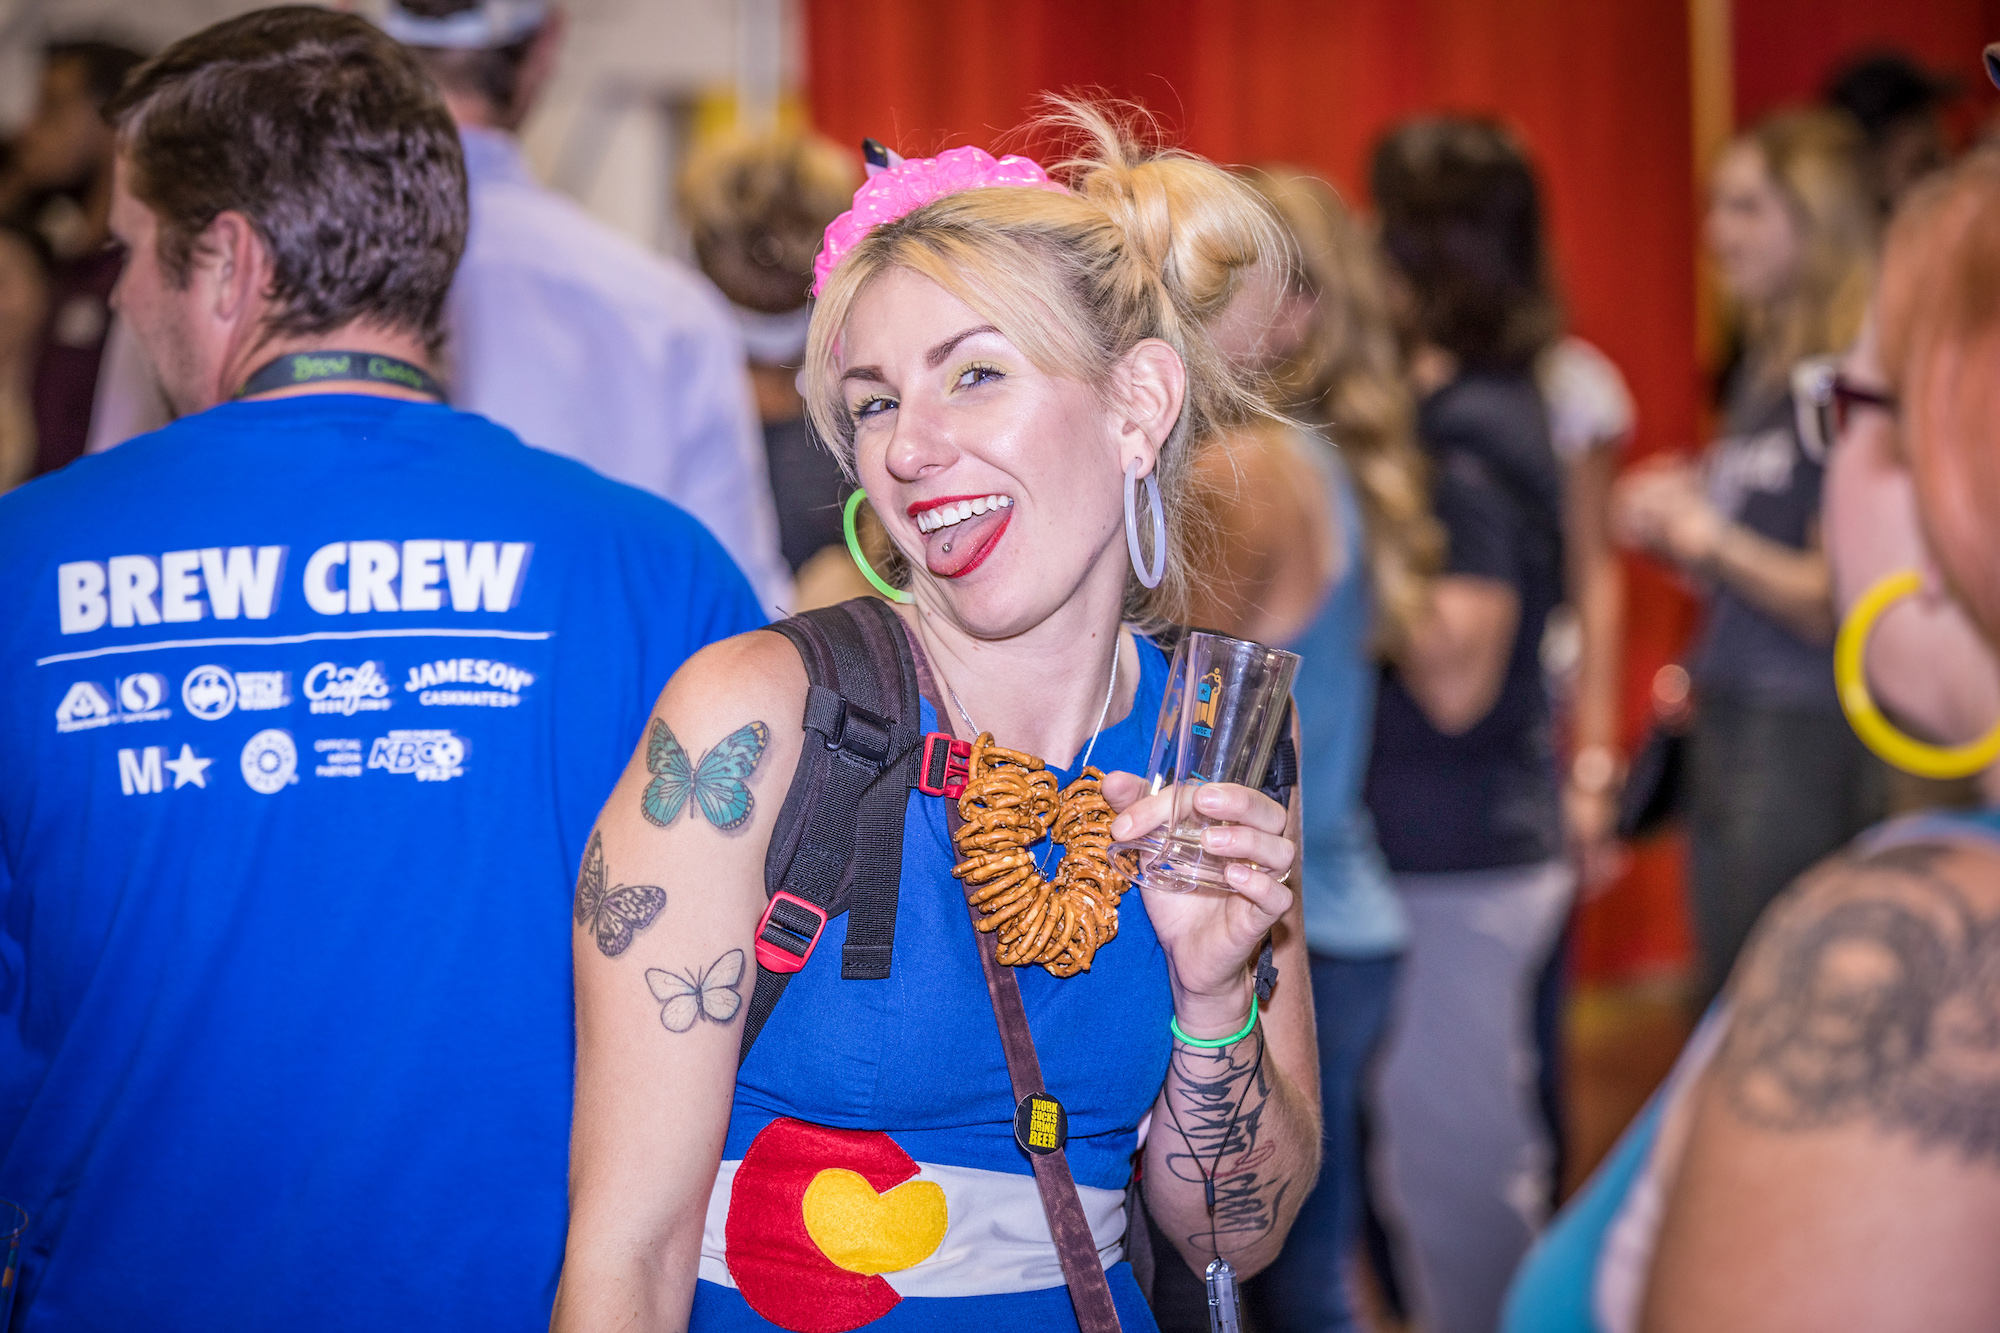 Media Advisory: Beer Lovers Gather for Great American Beer Festival® in  Colorado - Brewers Association